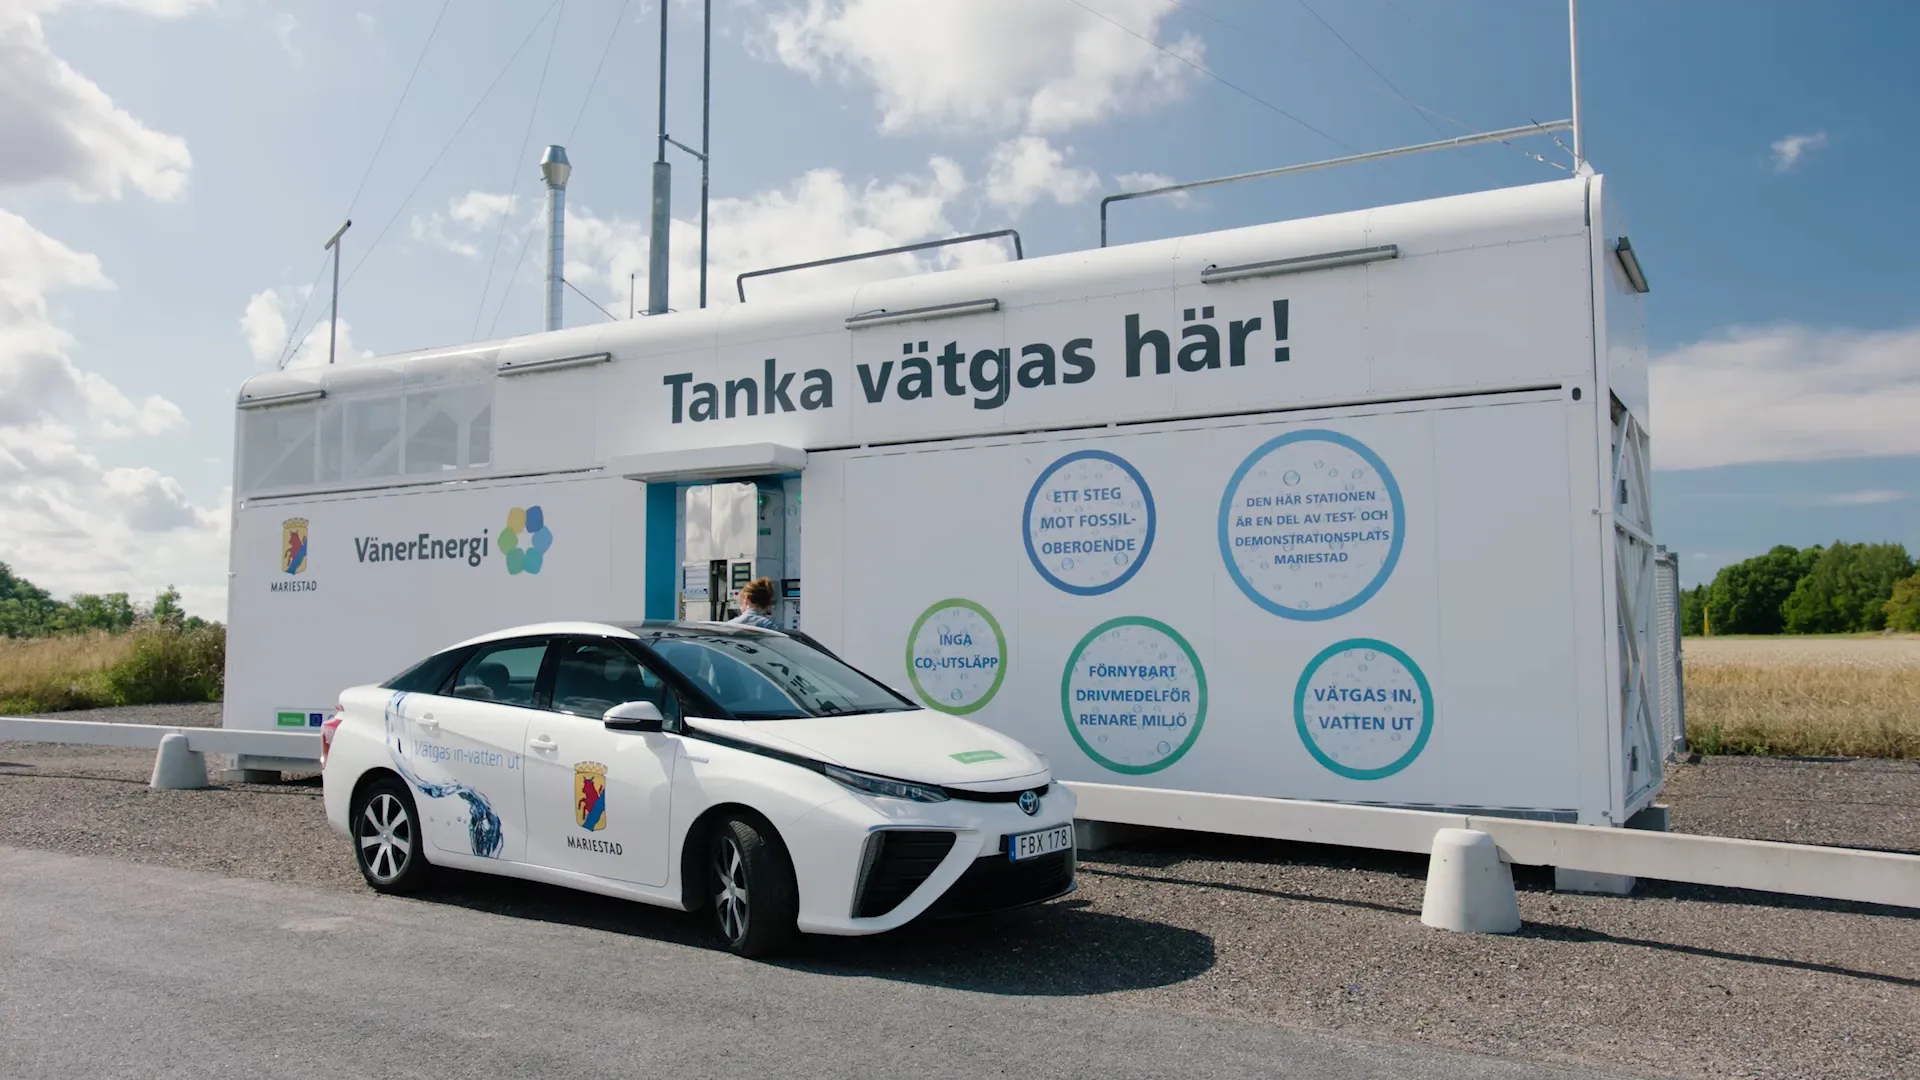 Mariestad municipality currently has 11 hydrogen cars in its own car pool. Hydrogen cars are a kind of electric car, where the hydrogen is converted to electricity in a fuel cell while driving - the only thing the cars emit is water.